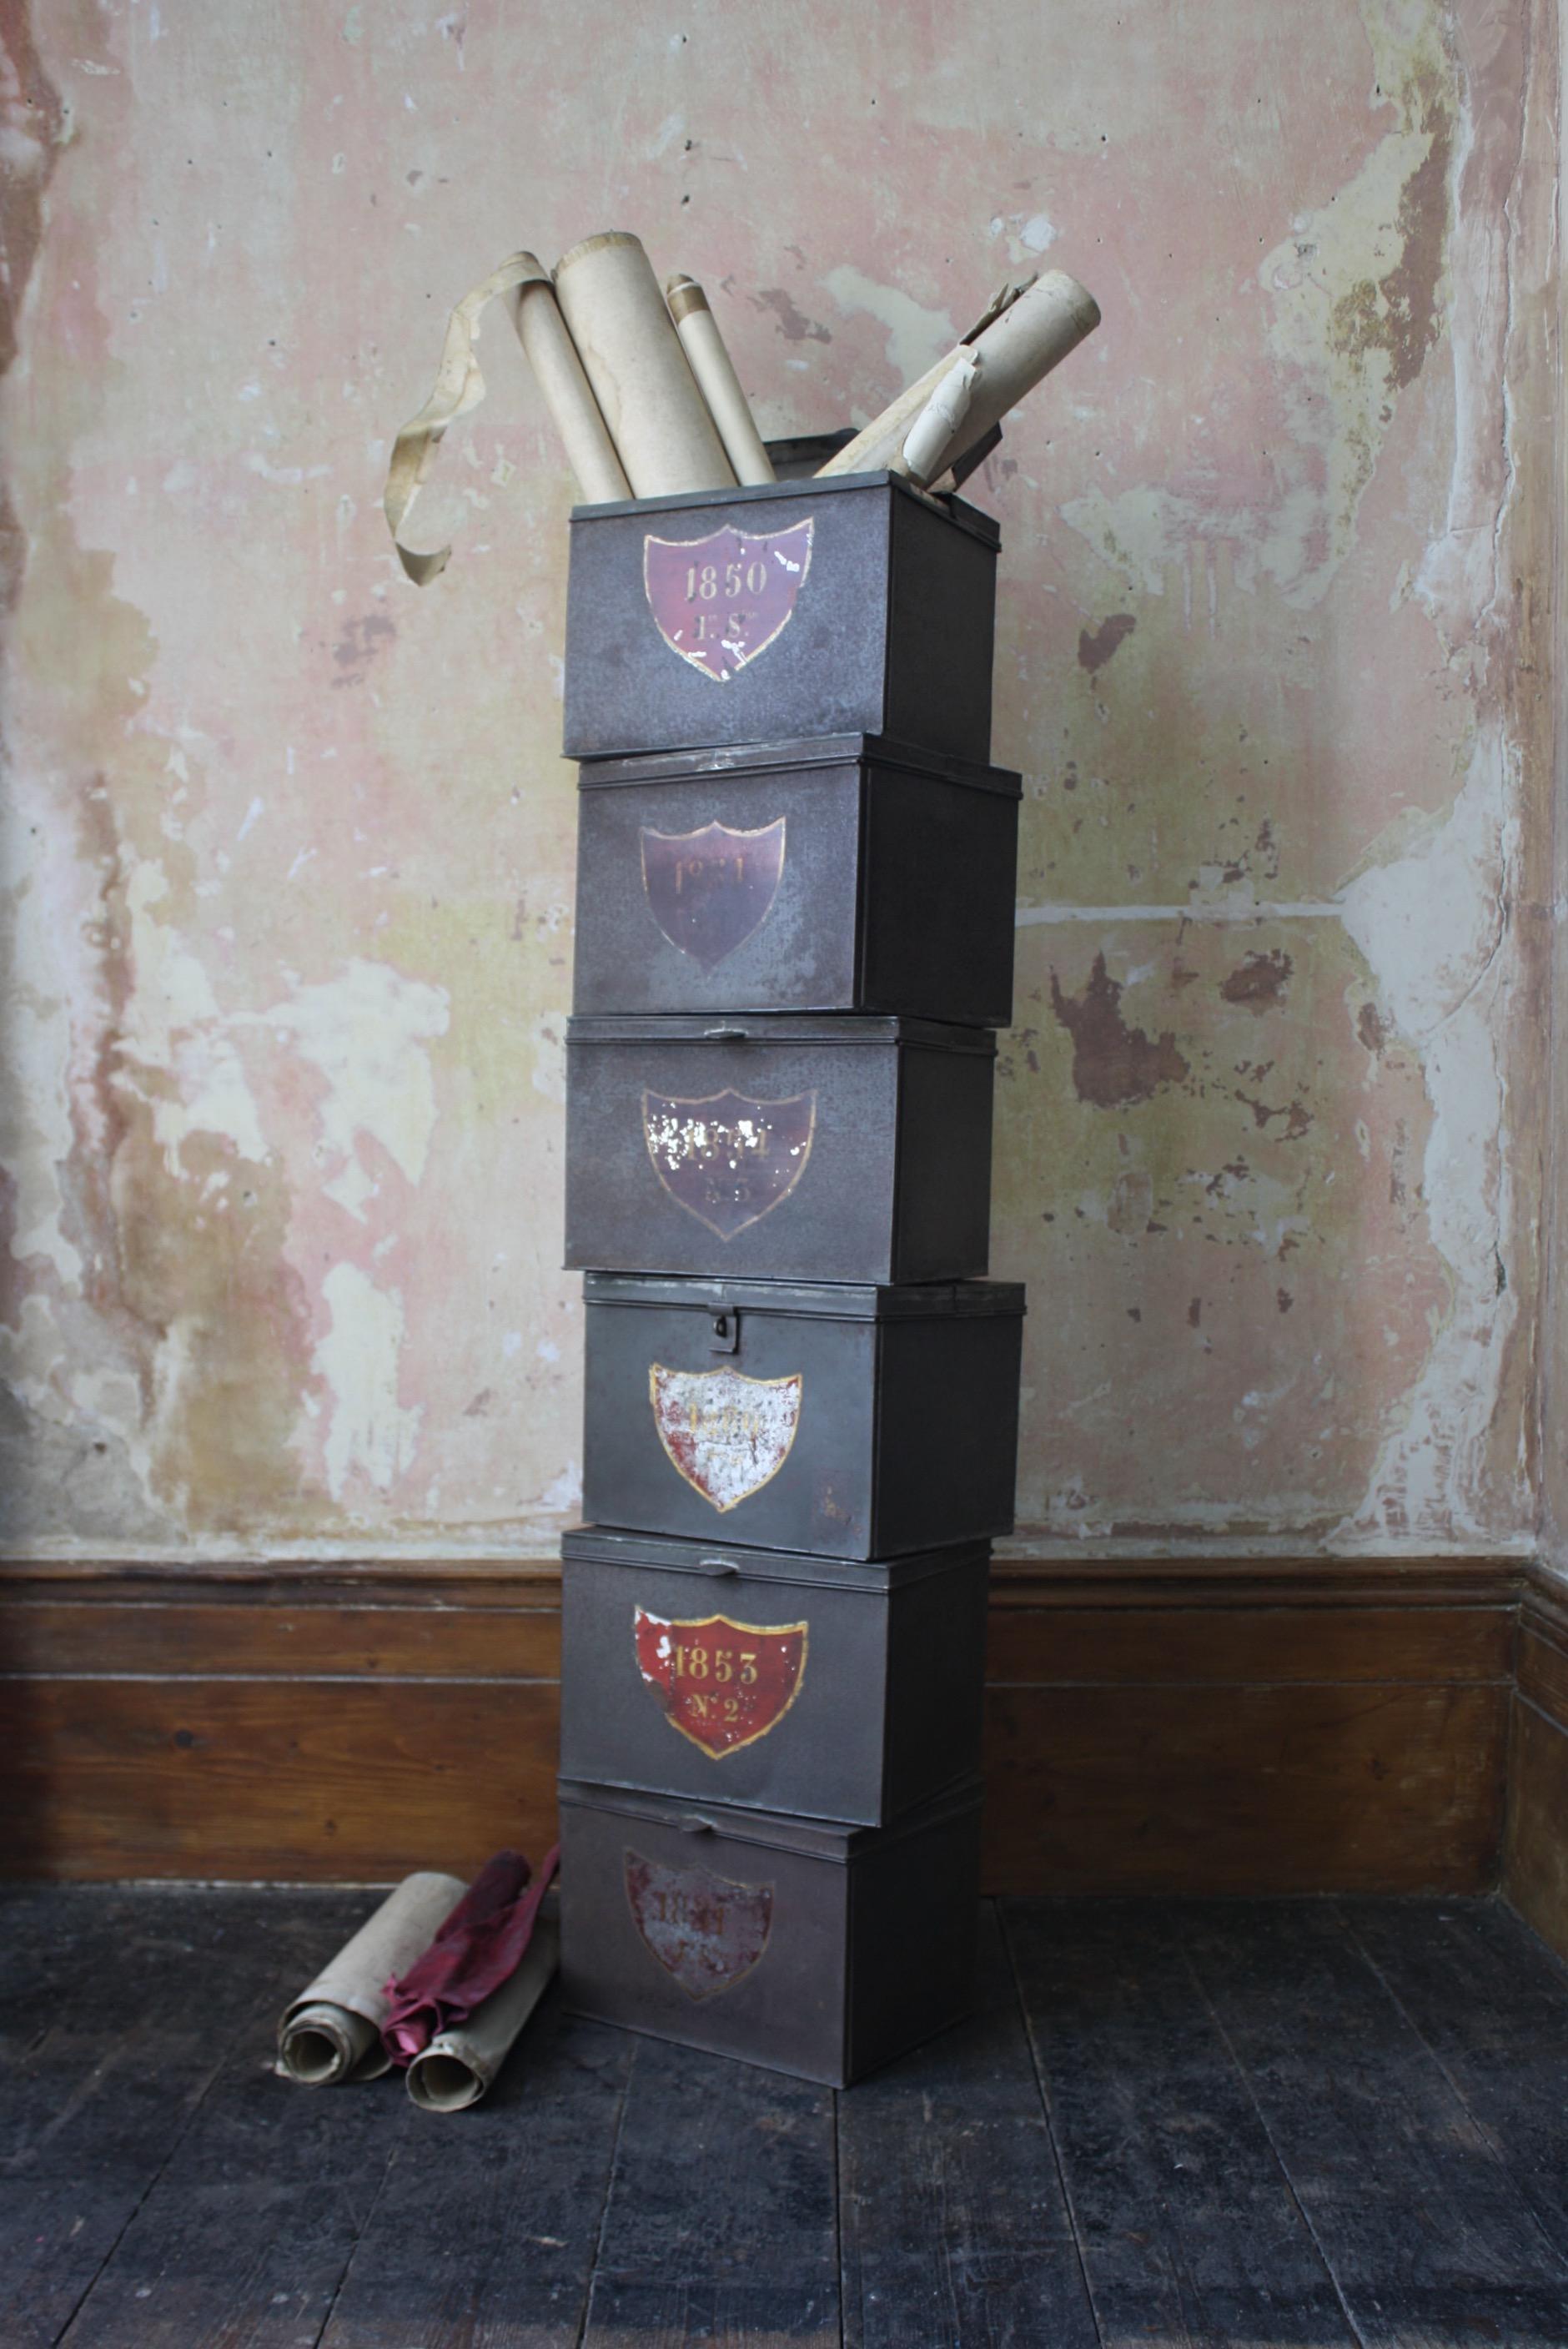 Collection of six sheet steel and hinged document boxes, with decorative squat Swiss style shields hand painted with dates and numbers.

Dating from 1850 to 1860 with differing amounts of wear to the paint work, highly decorative and